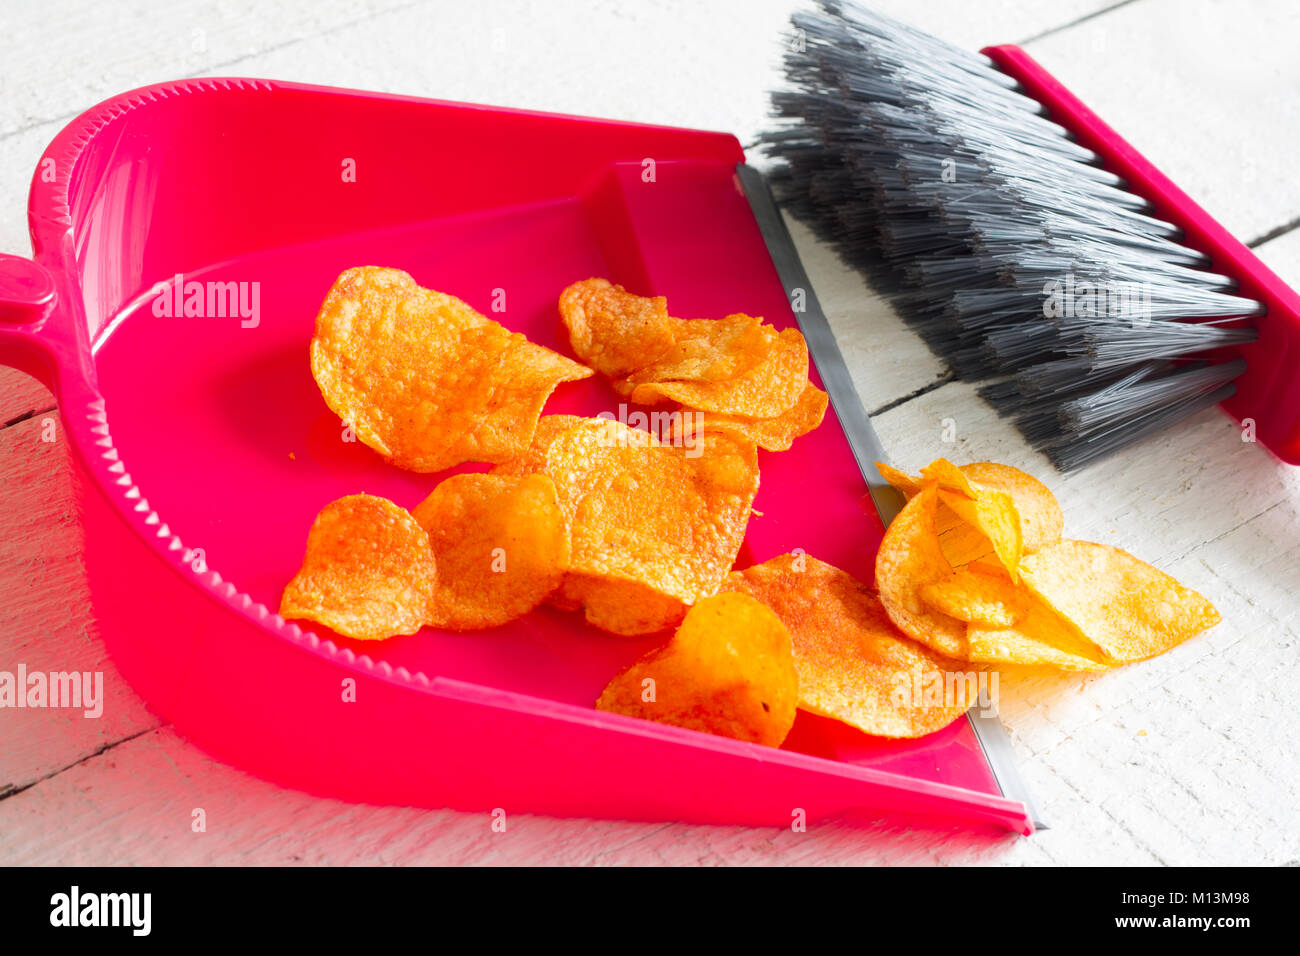 Sweeping junk food with chips and dustpan concept of health detox diet Stock Photo